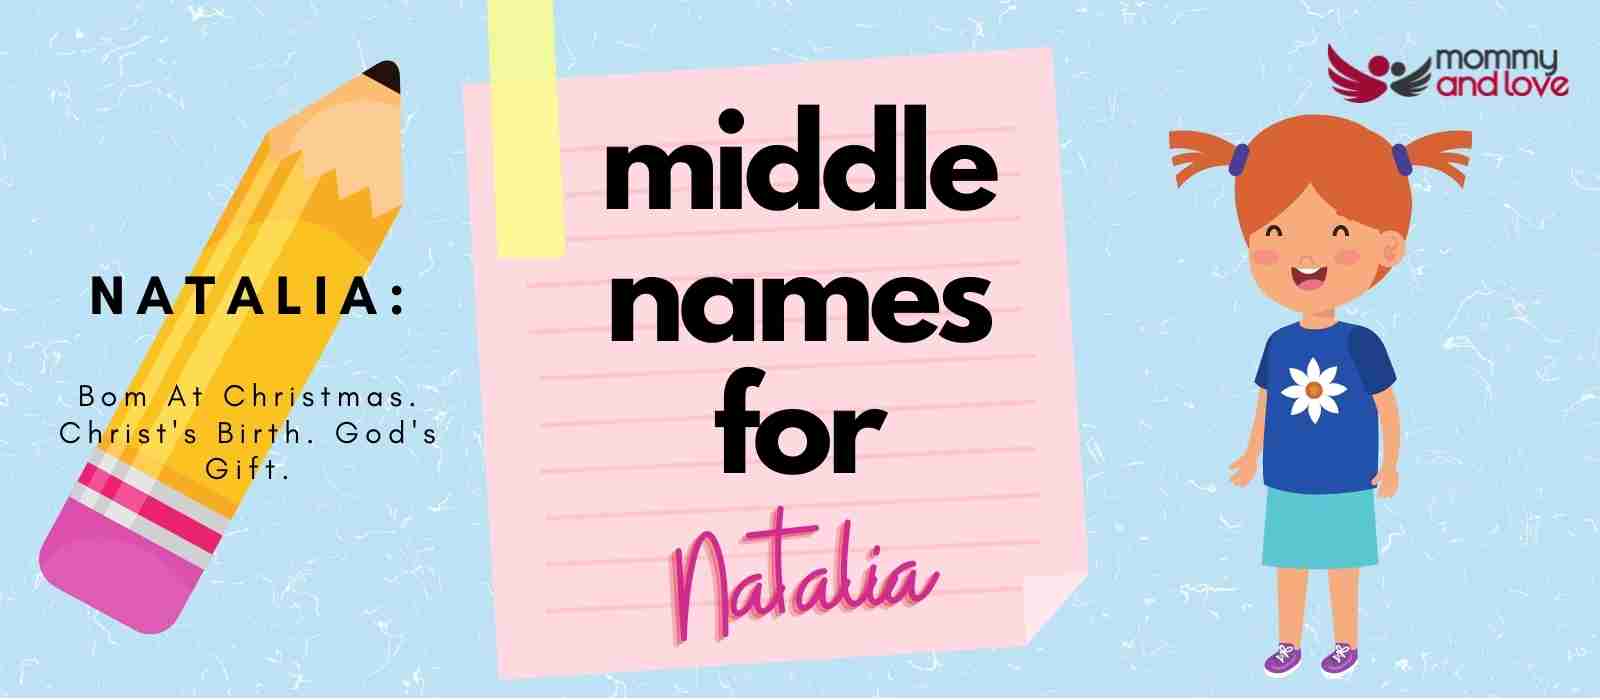 Middle Names for Natalia